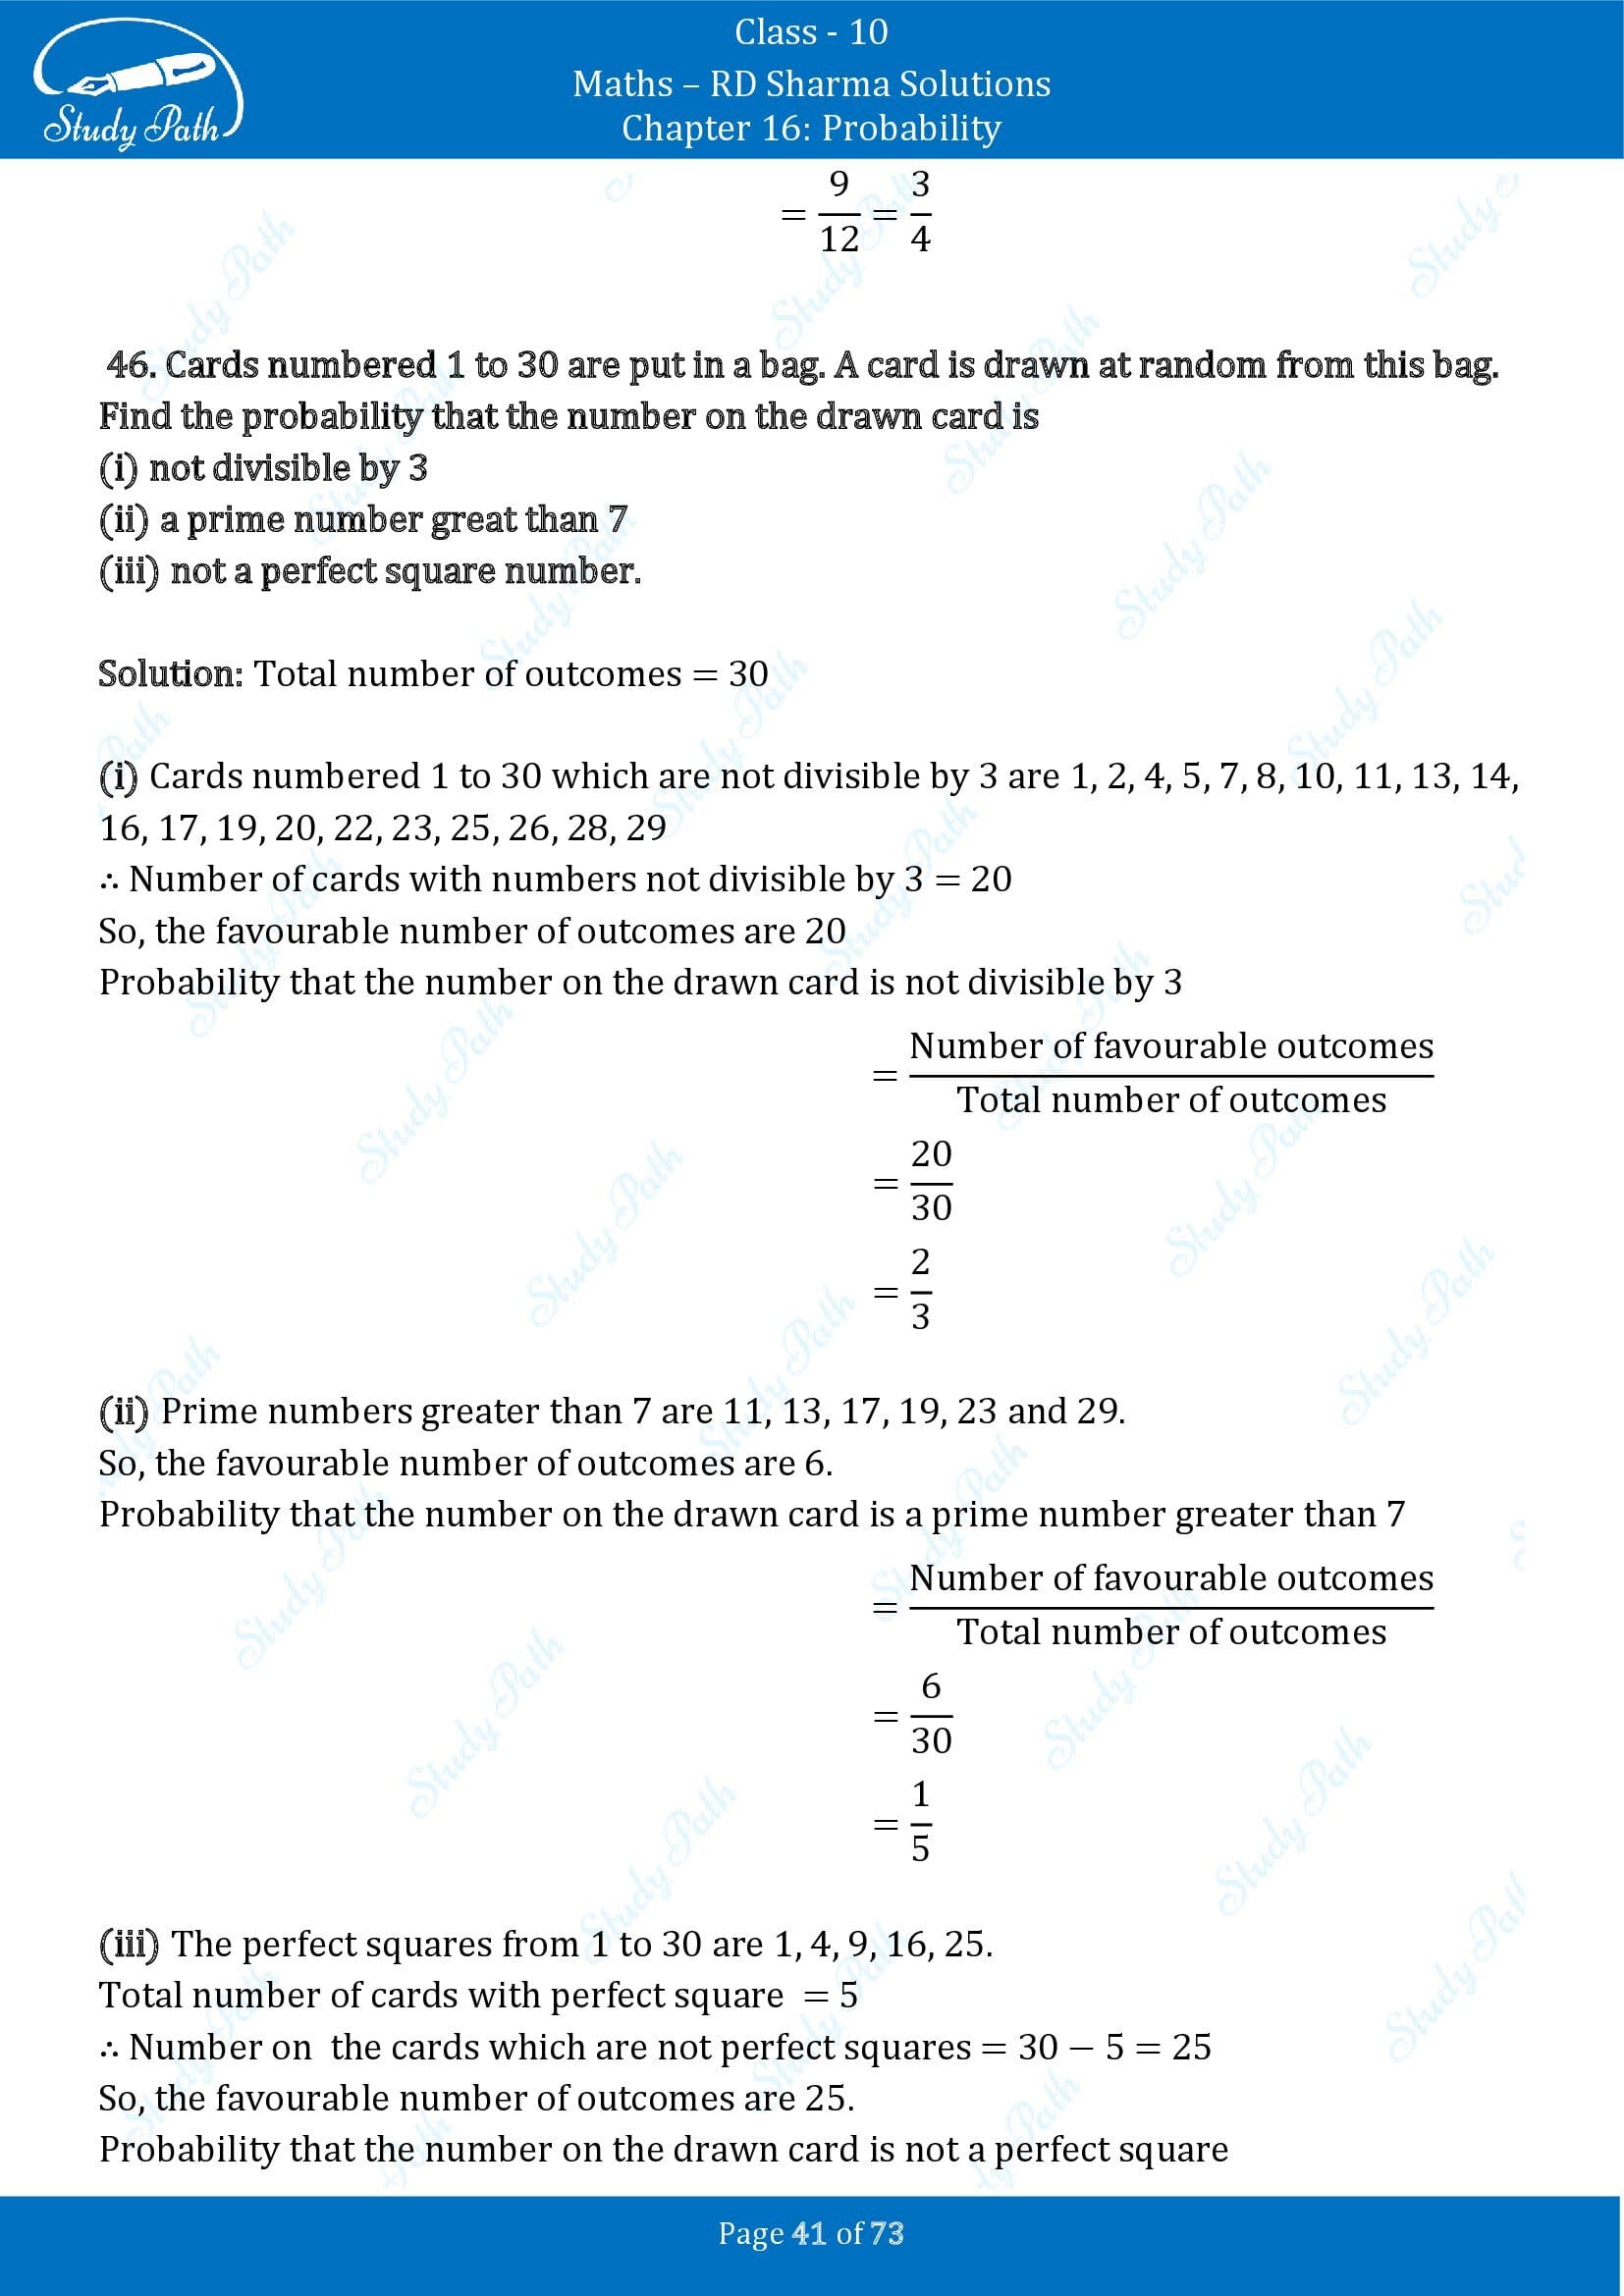 RD Sharma Solutions Class 10 Chapter 16 Probability Exercise 16.1 00041